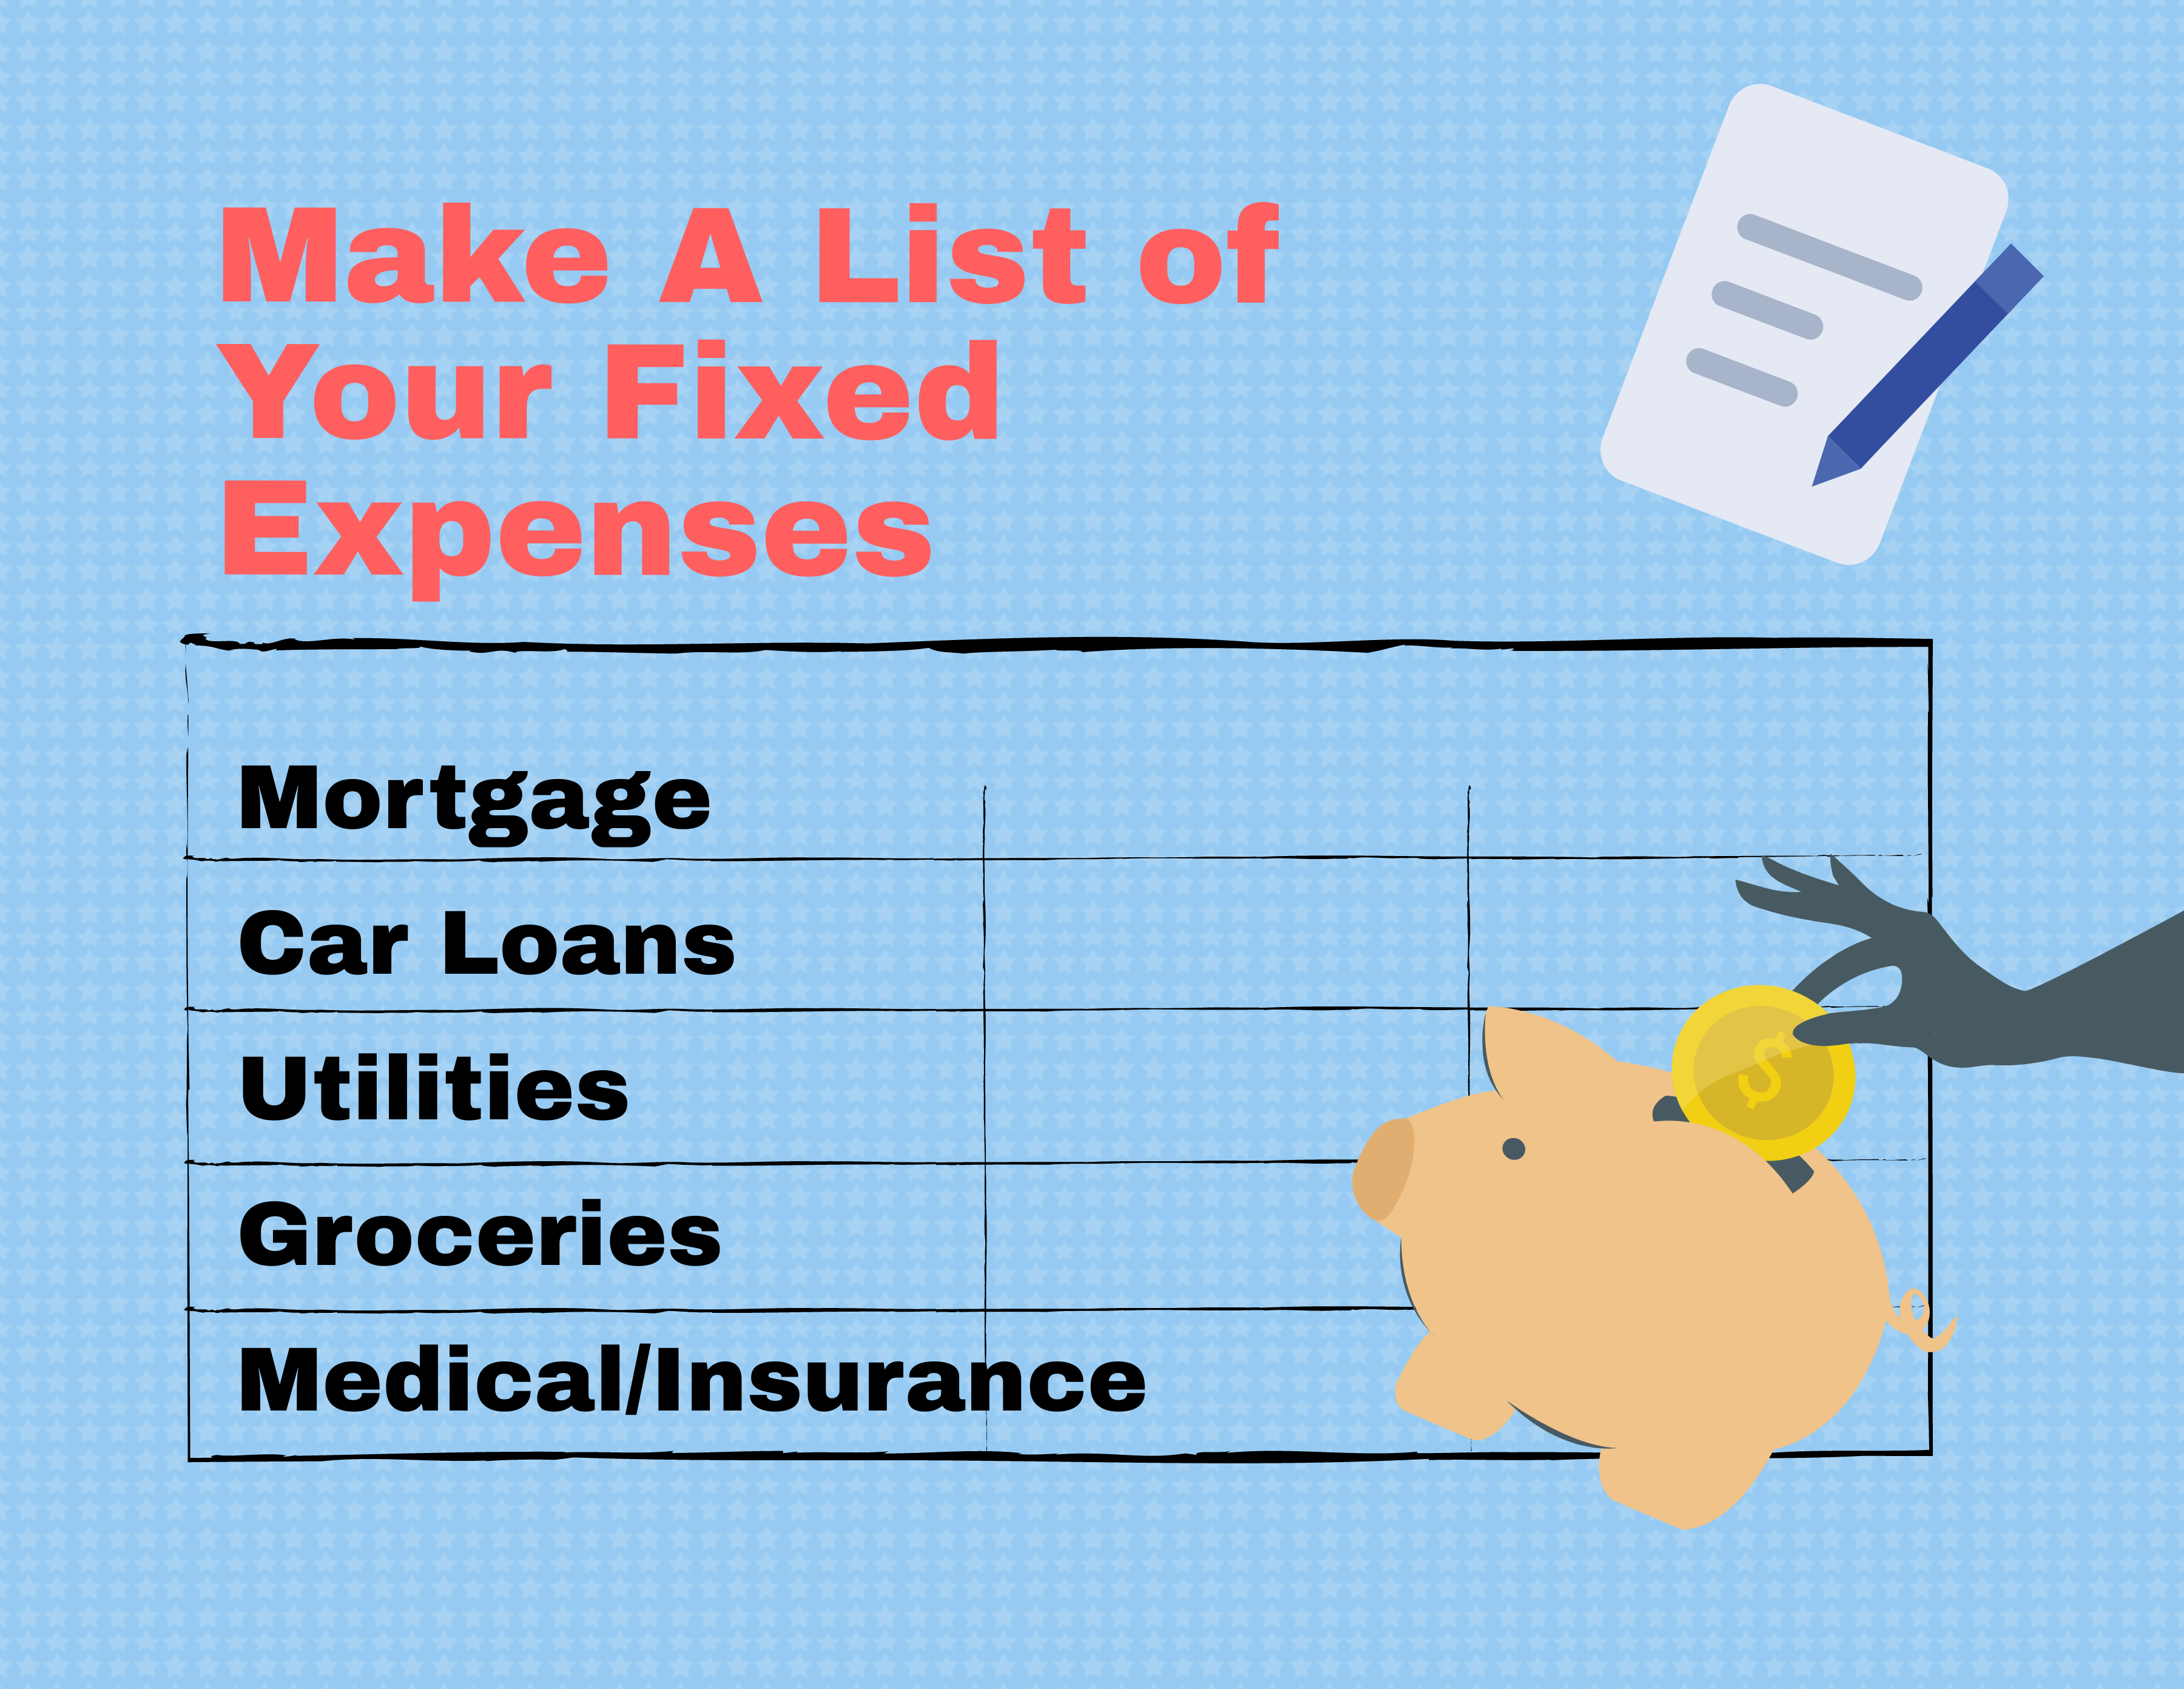 Graphic image showing how to make a list of your fixed expenses